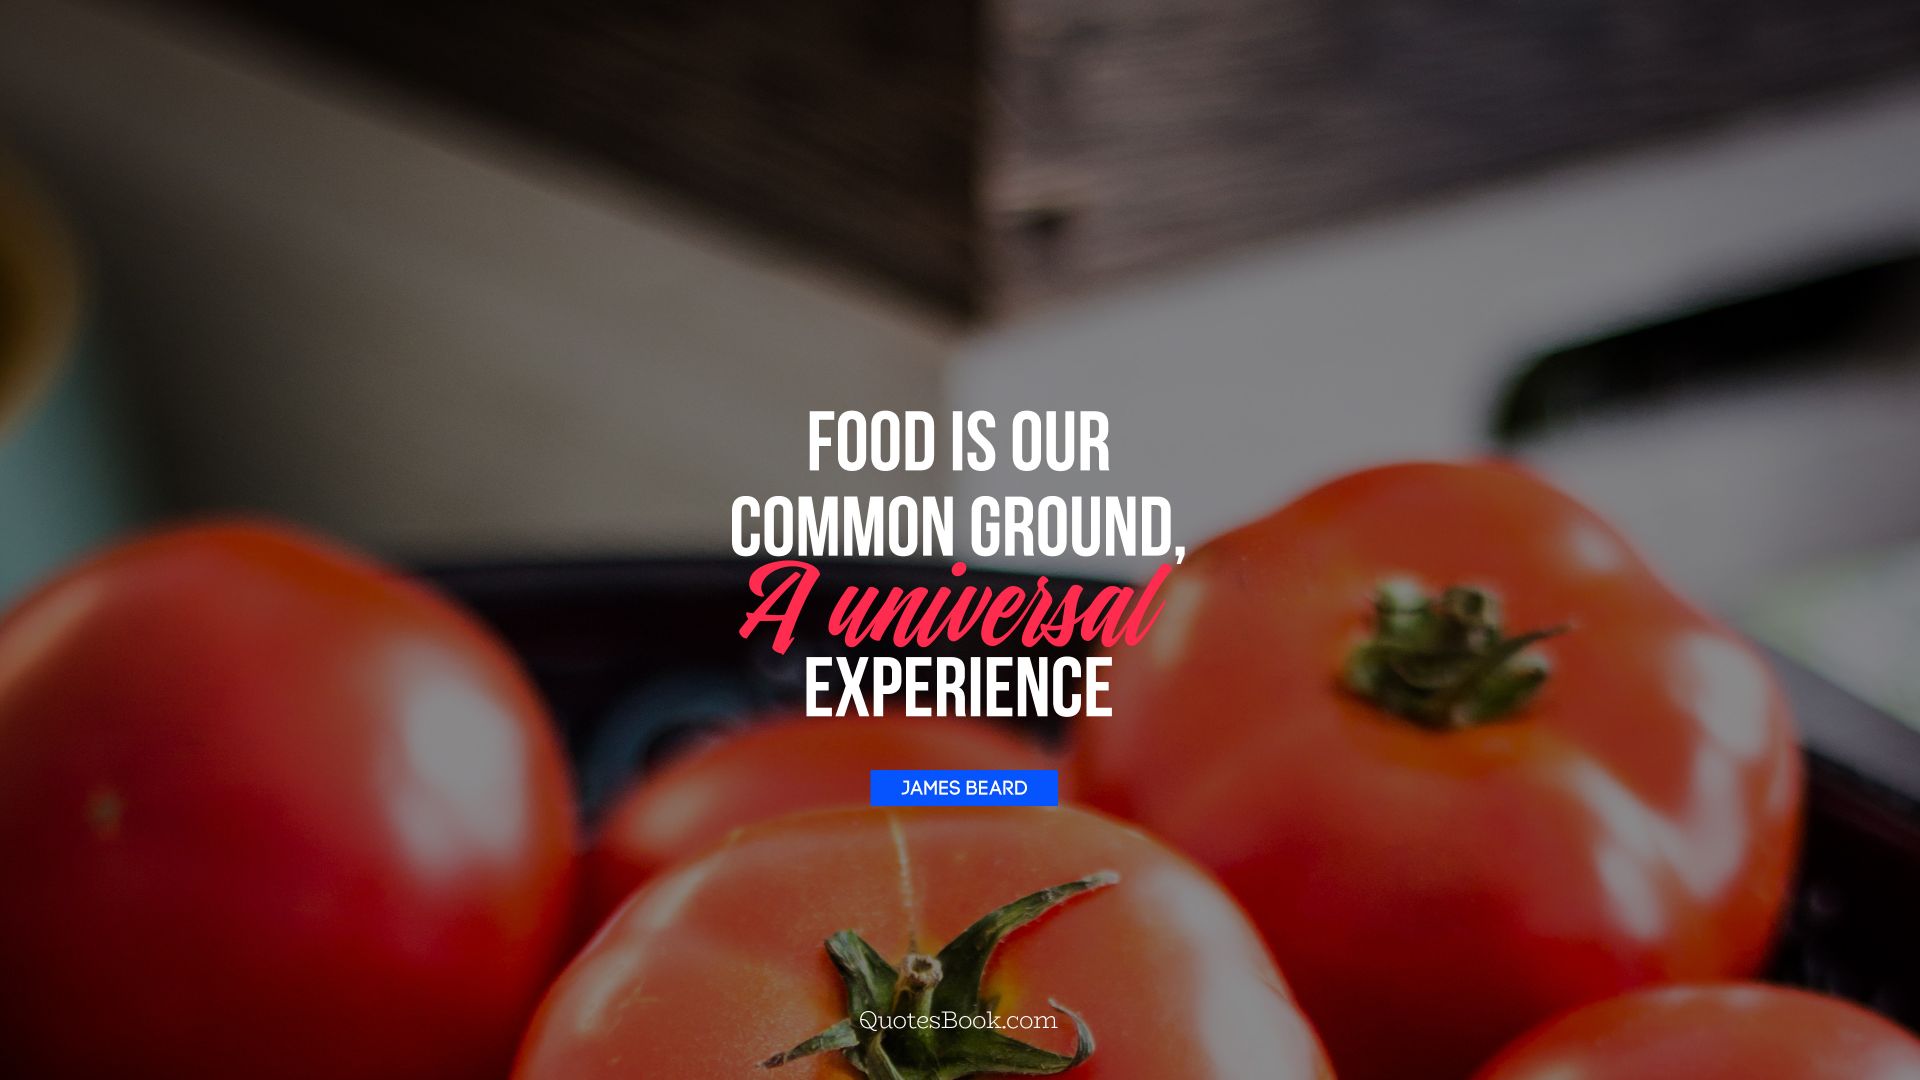 Food is our common ground, a universal experience. - Quote by James Beard